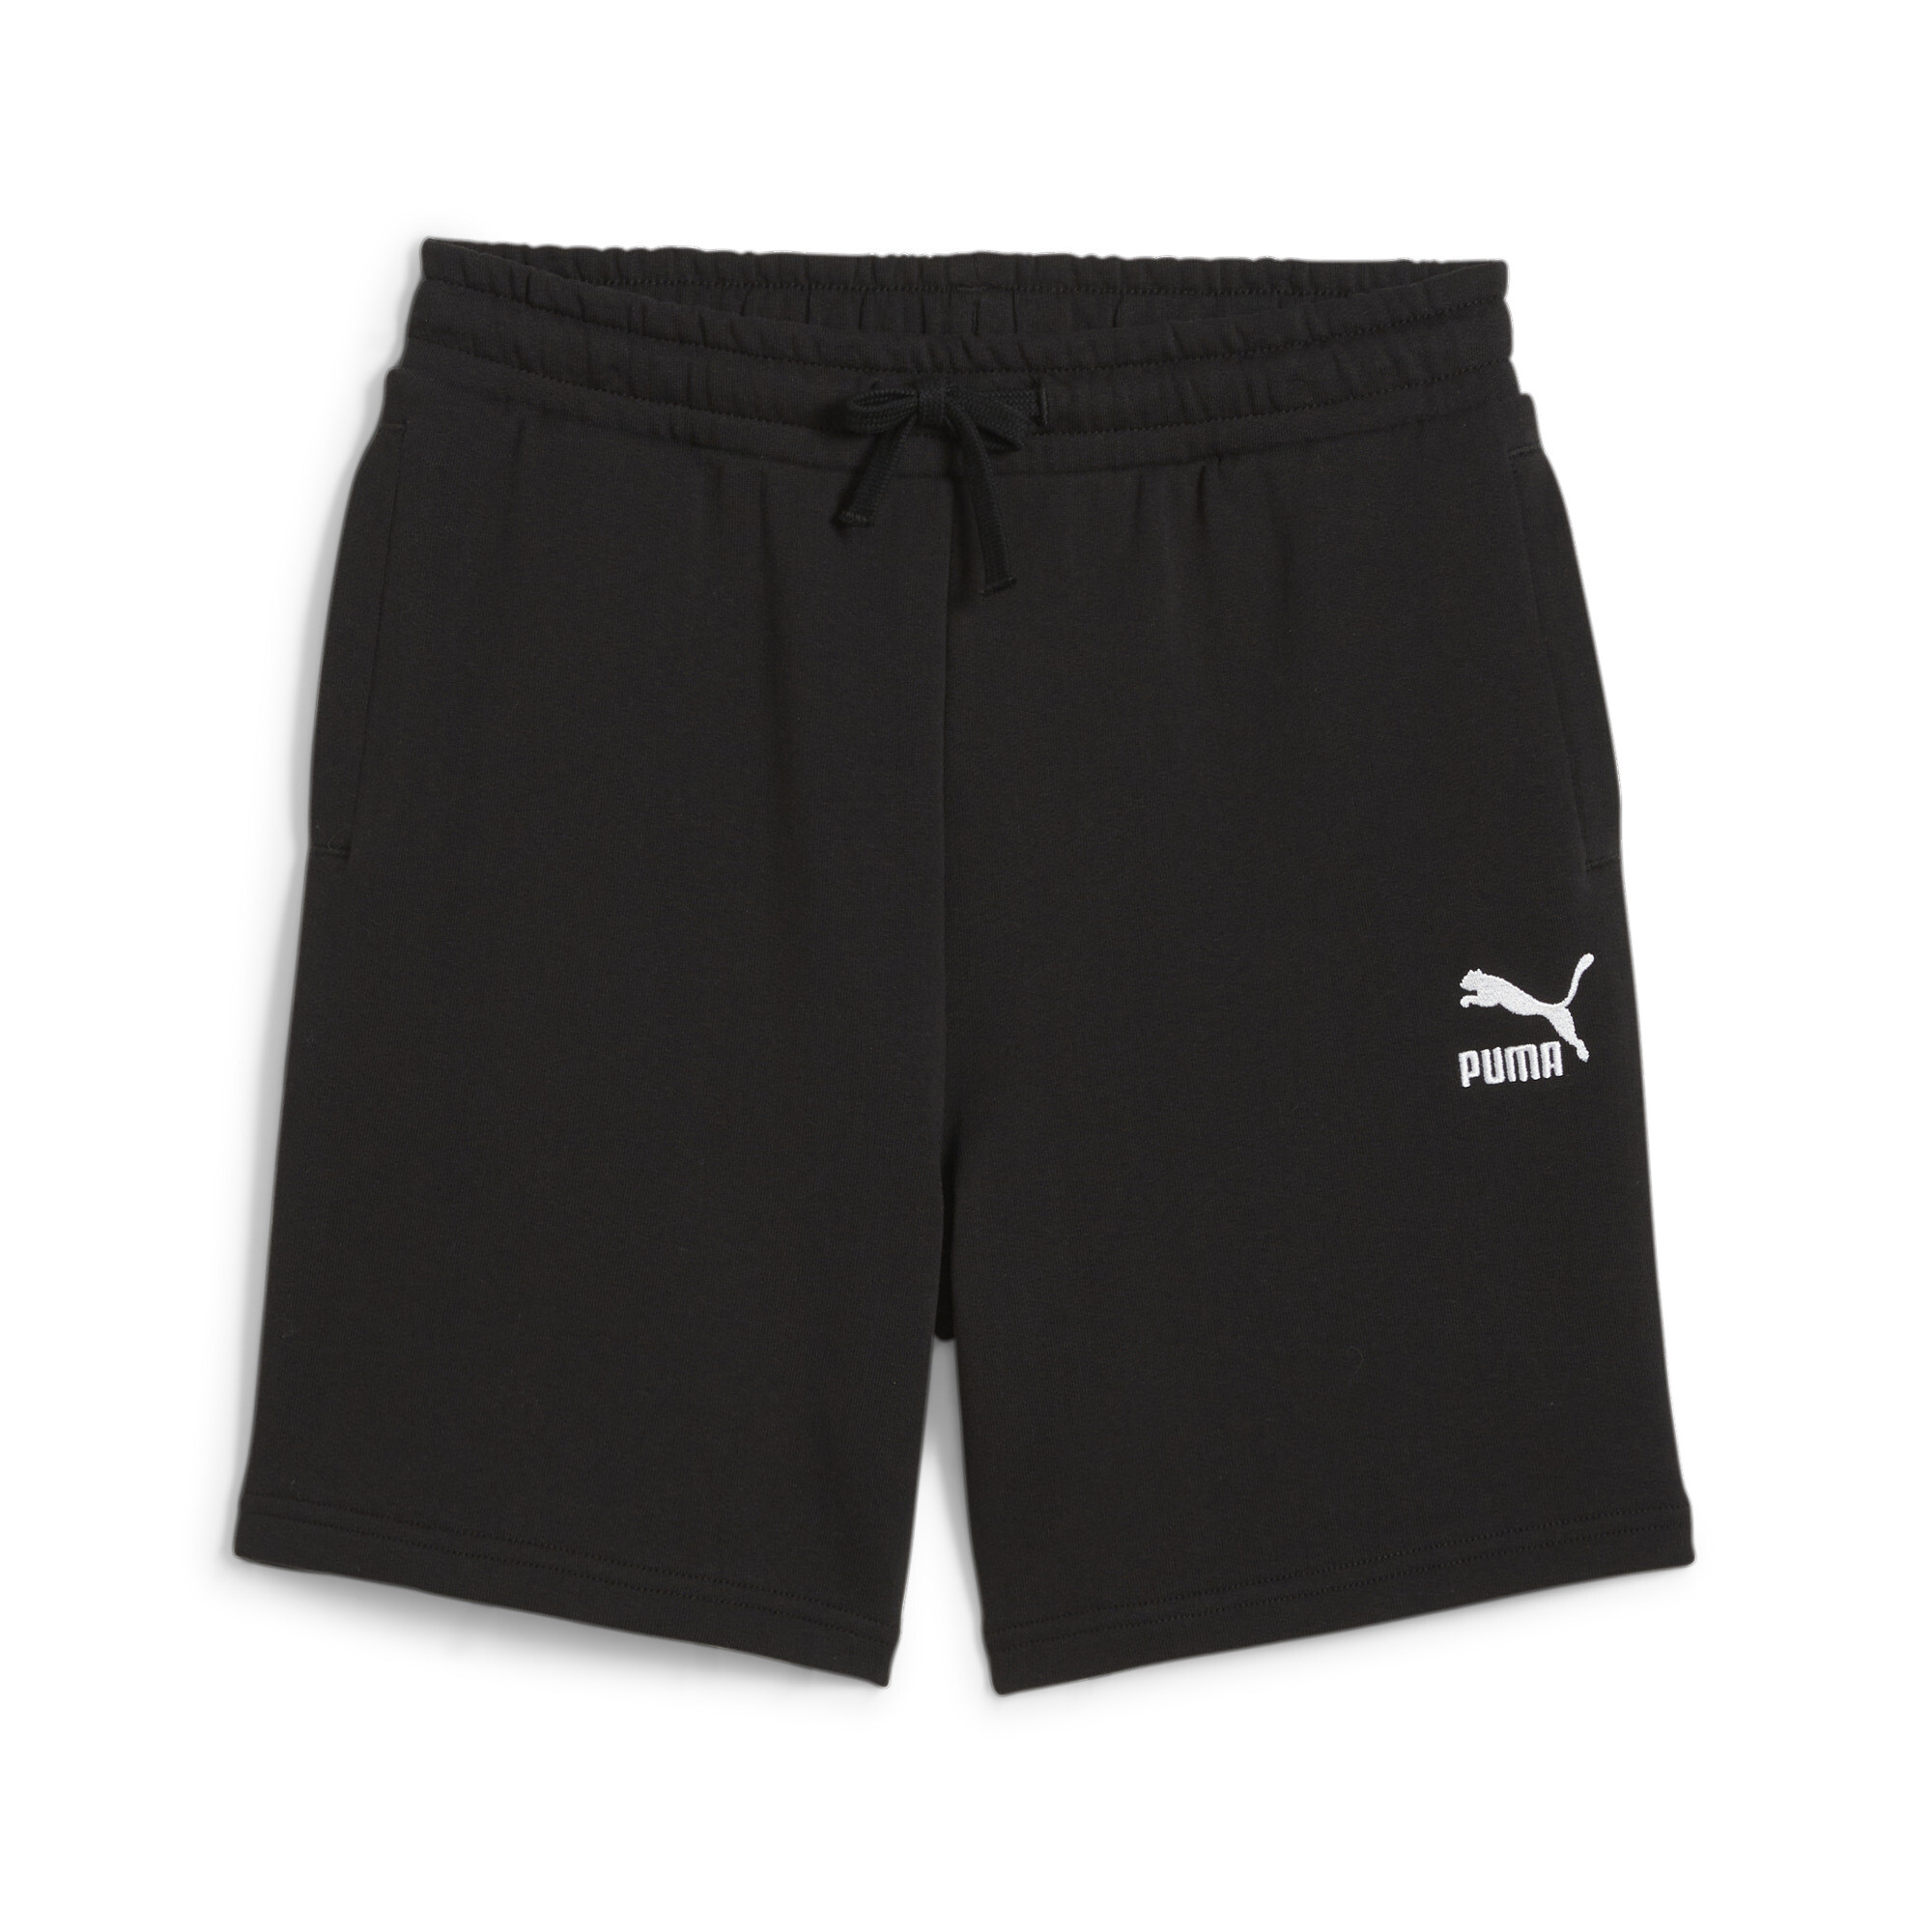 PUMA BETTER CLASSICS Shorts In Black, Size 7-8 Youth